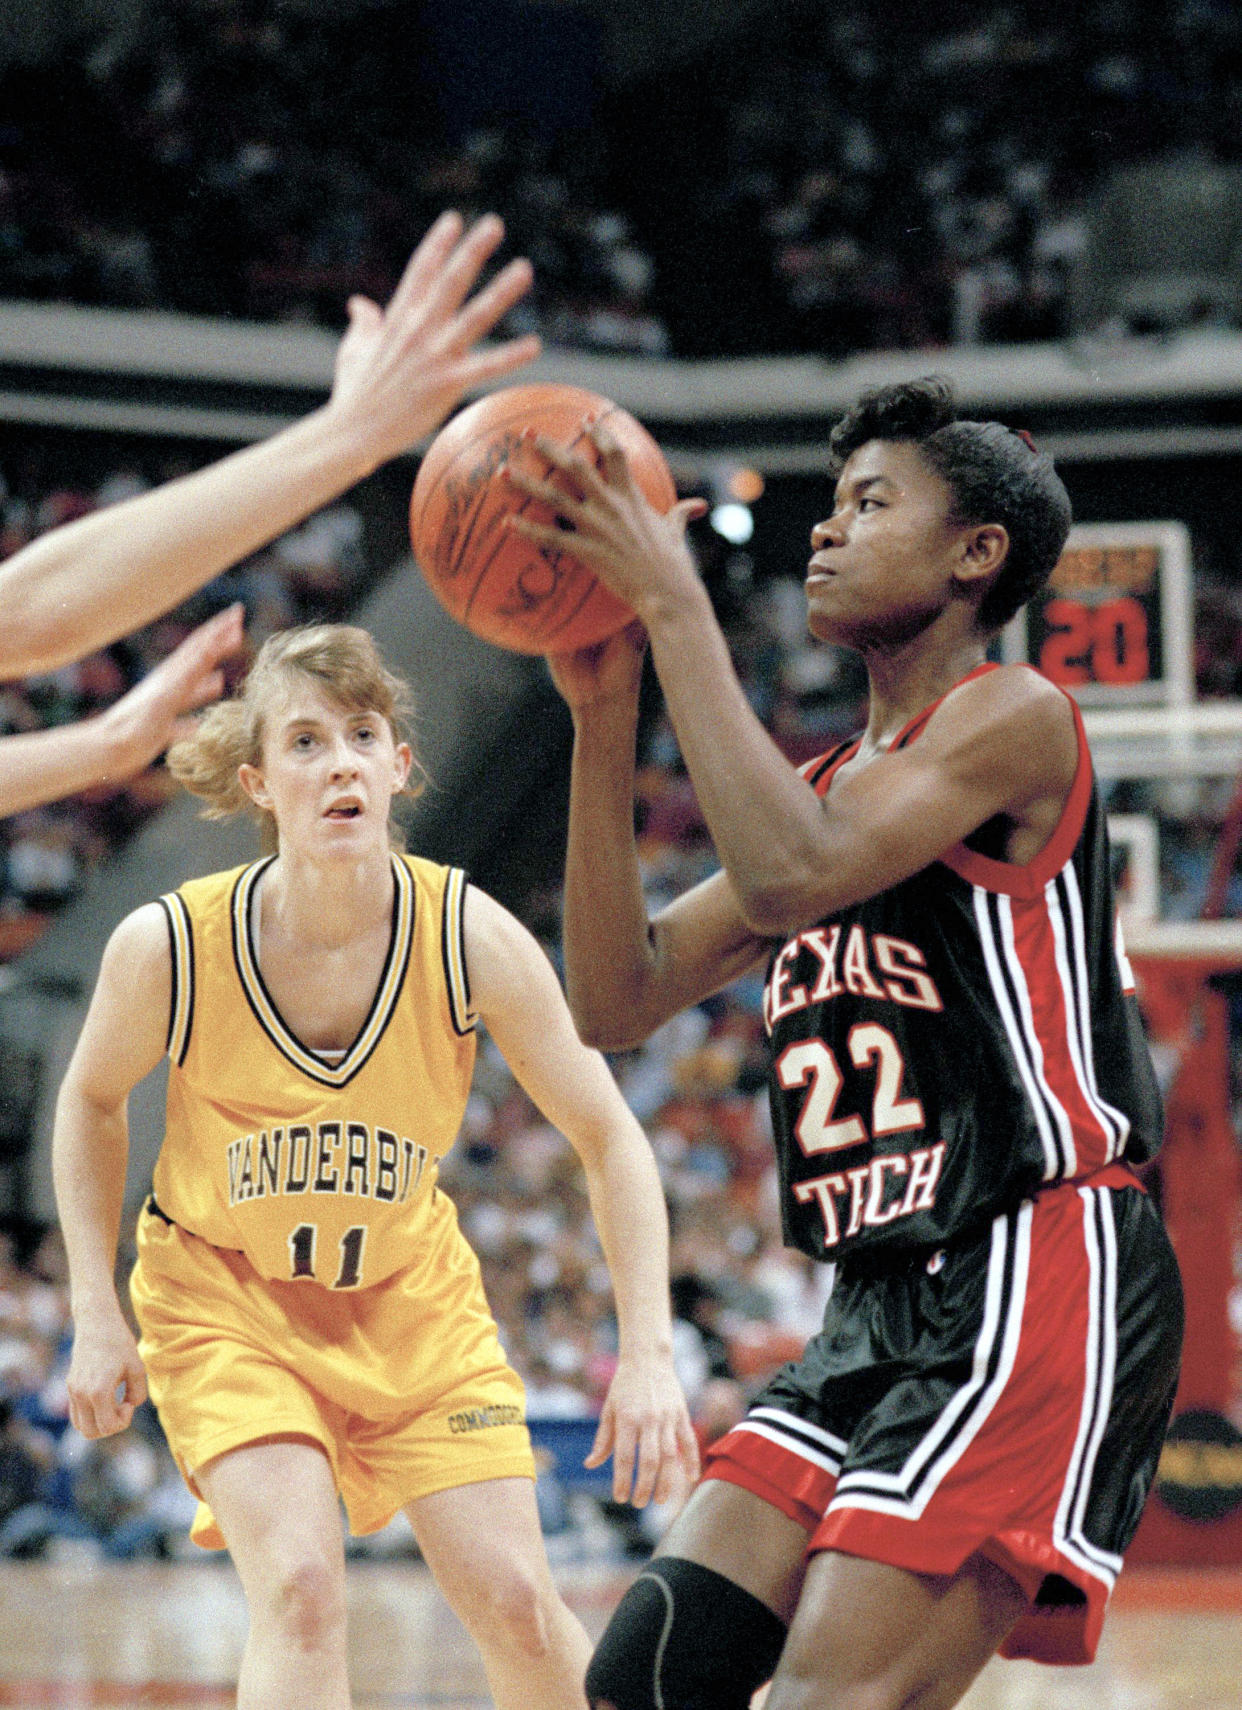 Texas Tech's Sheryl Swoopes goes for the shot after bypassing Vanderbilt's Rhonda Blades during first half action in the semi-final of the NCAA Women's Final Four at Atlanta's Omni, April 3, 1993. Swoopes scored 31 to lead Texas Tech to a 60-46 victory. (AP Photo/Amy Sancetta)